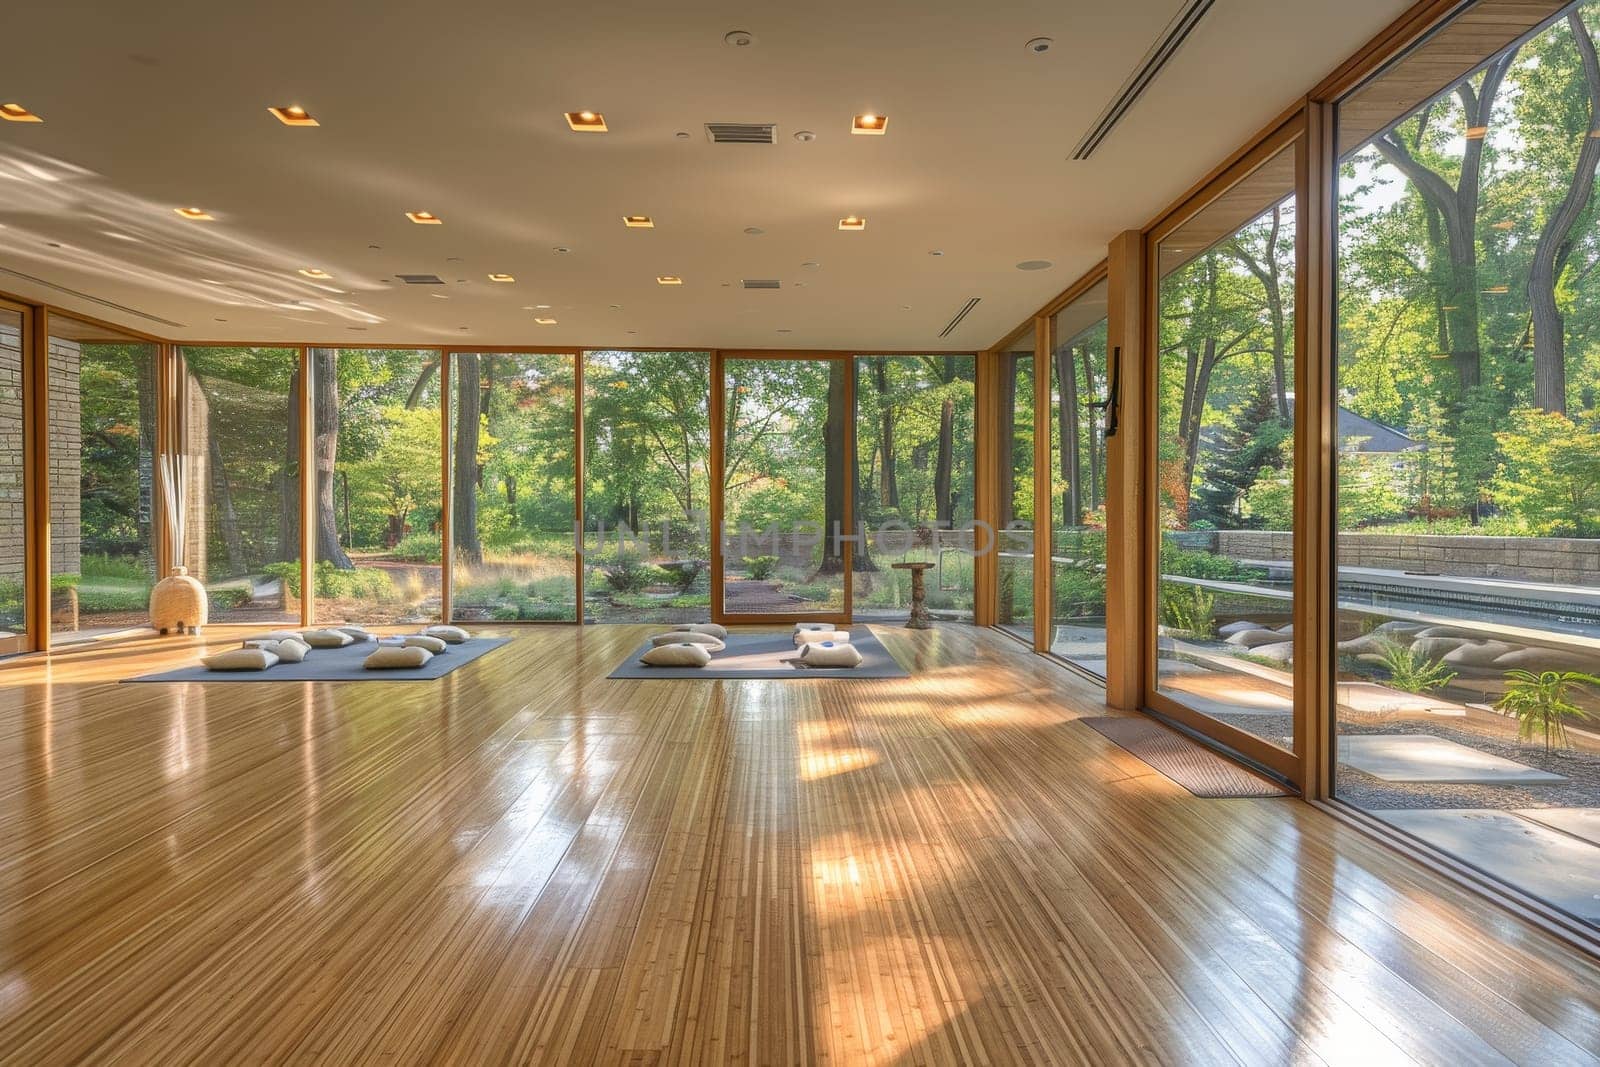 A large room with wooden floors and lots of windows. The room is empty and has a peaceful, calming atmosphere